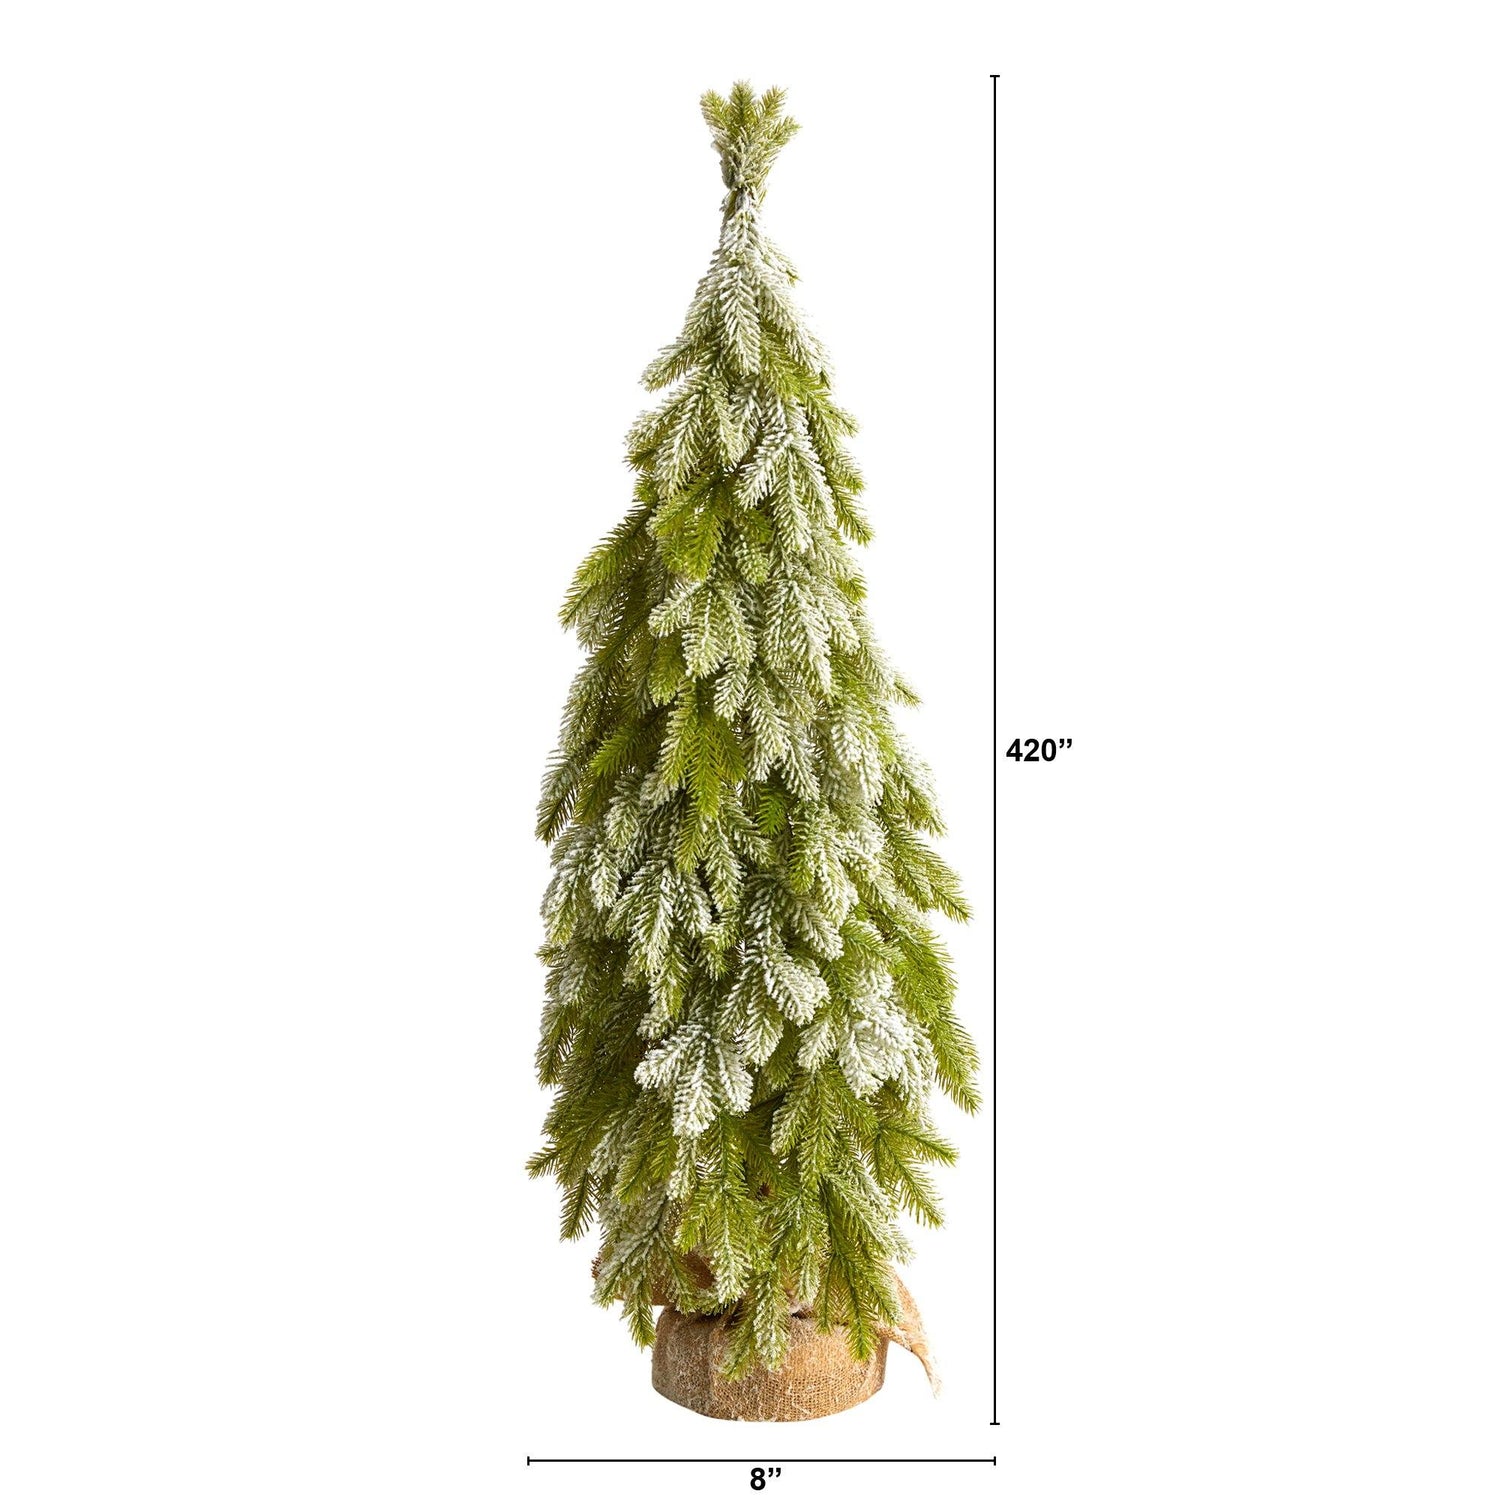 35” Snow Flocked Down Swept Holiday Artificial Christmas Tree in Burlap Base